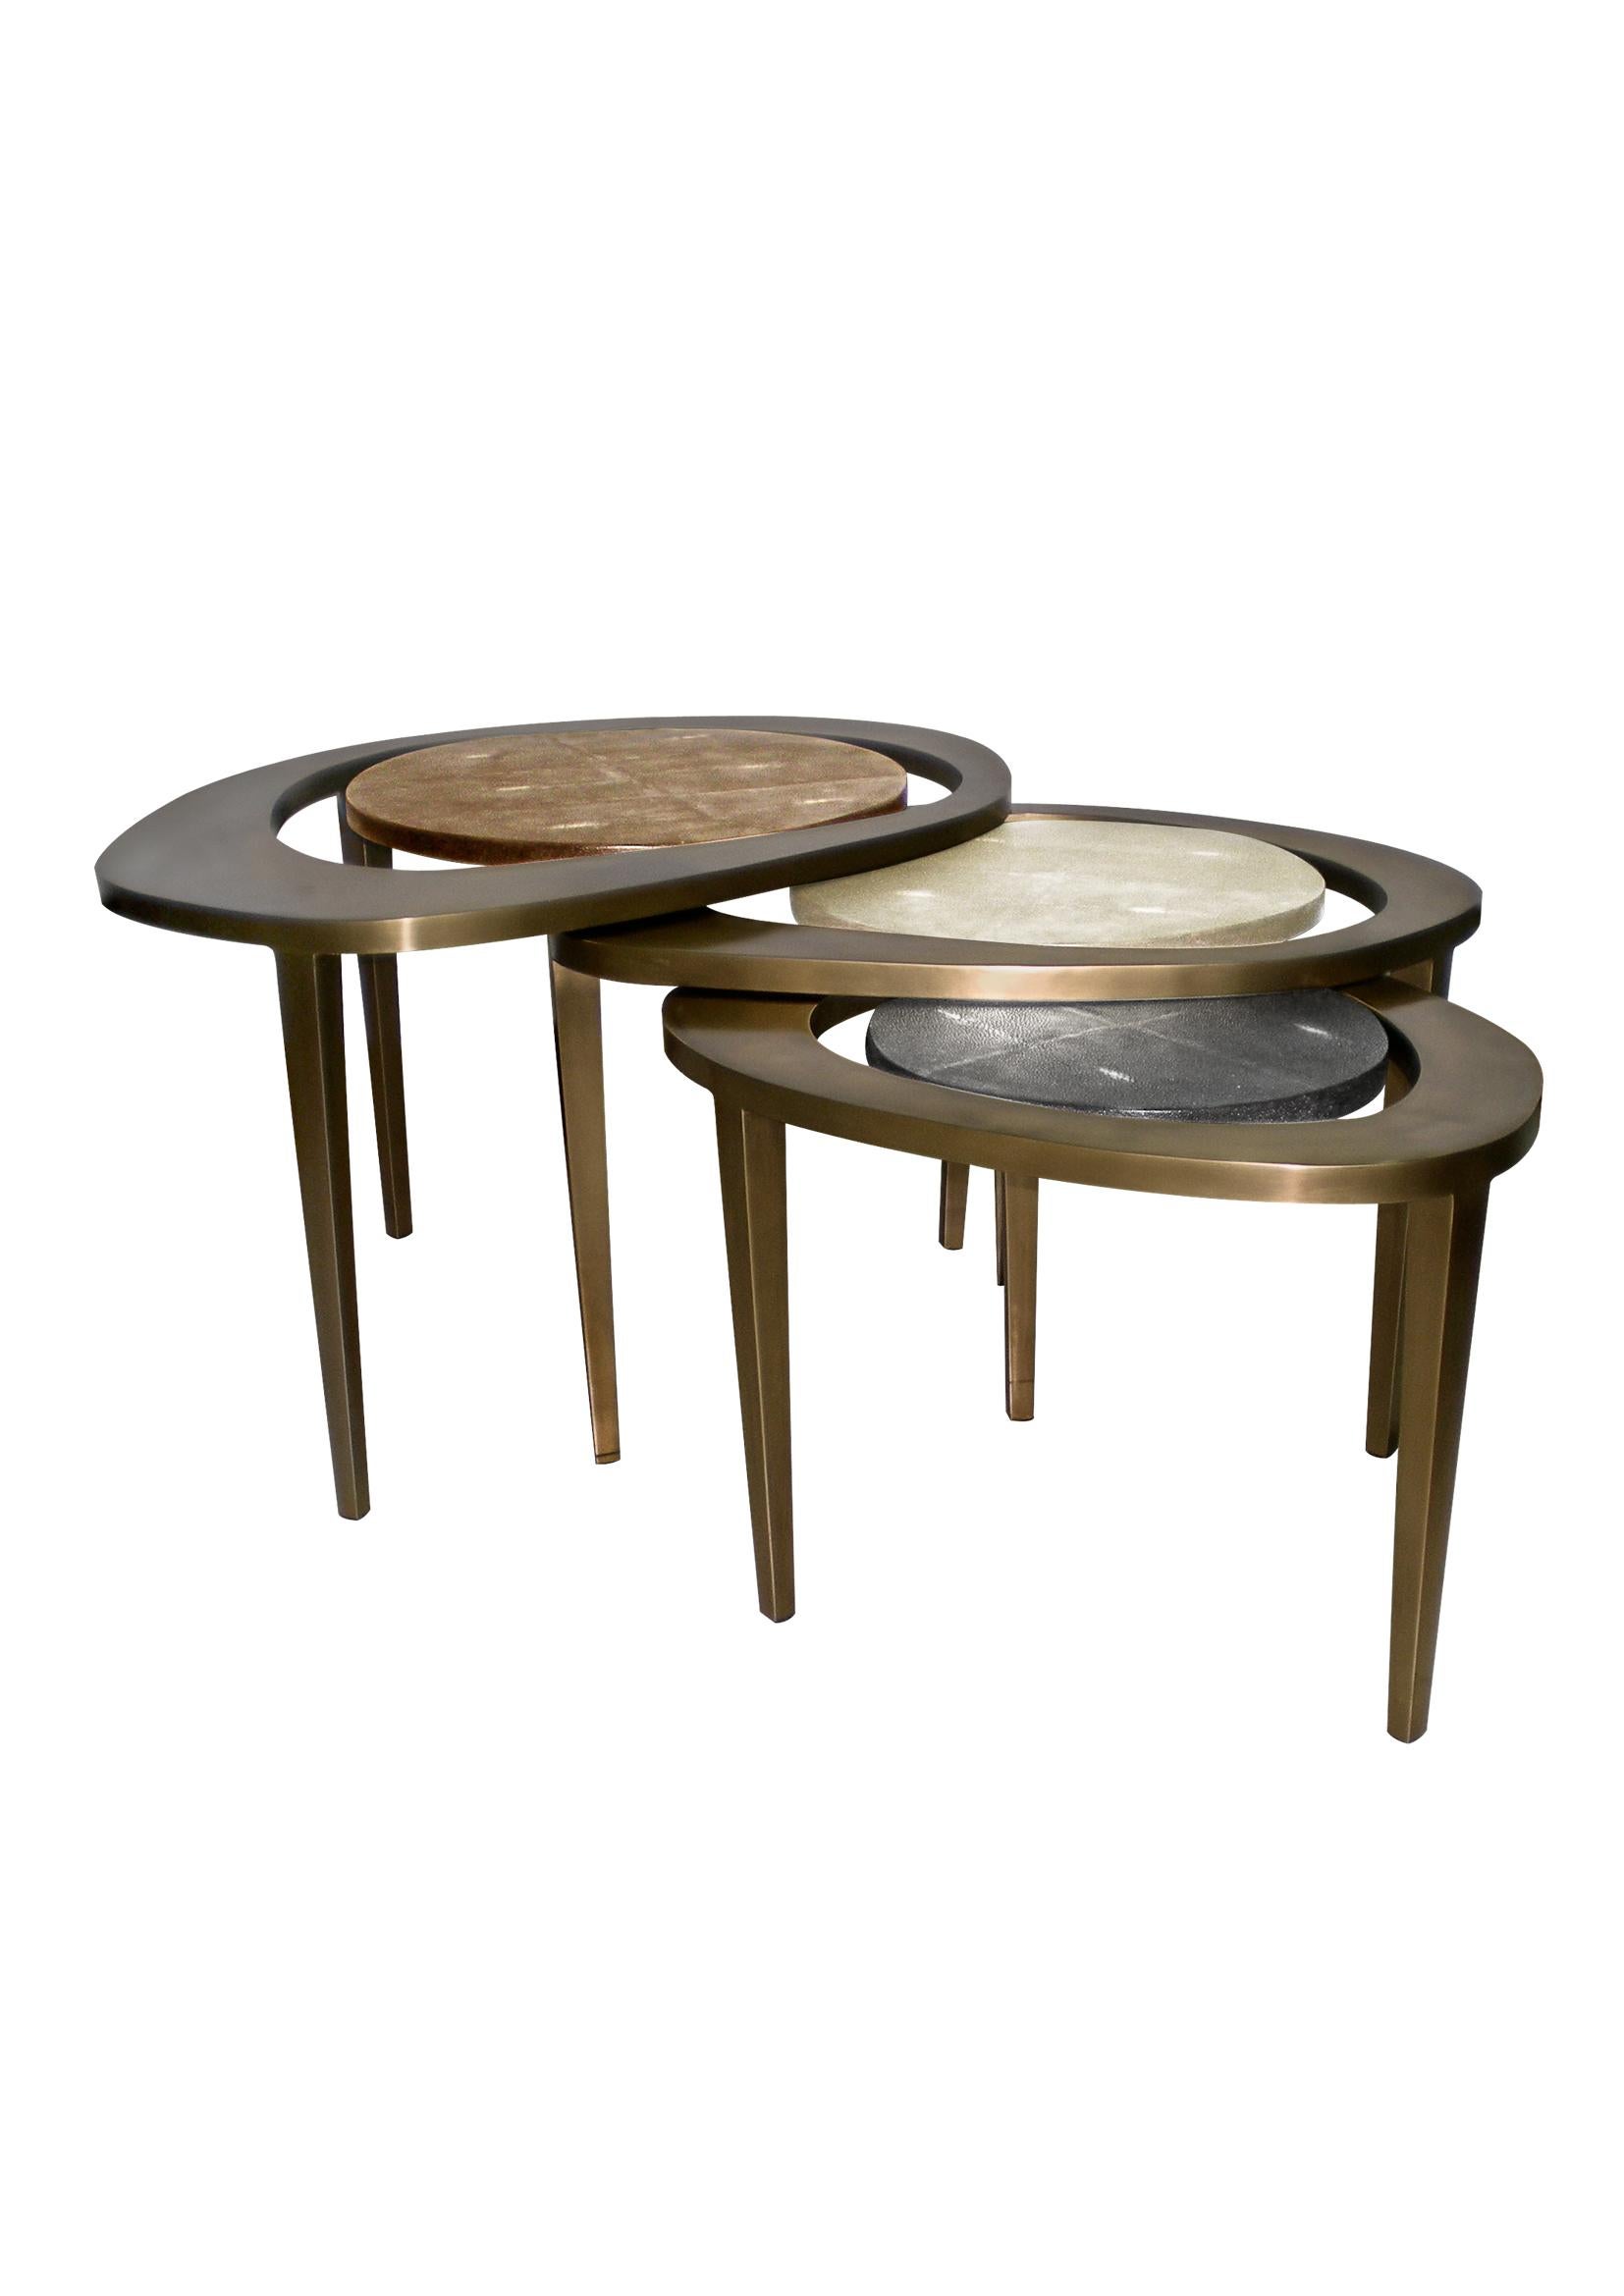 Set of 3 Peacock Nesting Side Tables in, Shagreen, Shell & Brass by R&Y Augousti For Sale 7